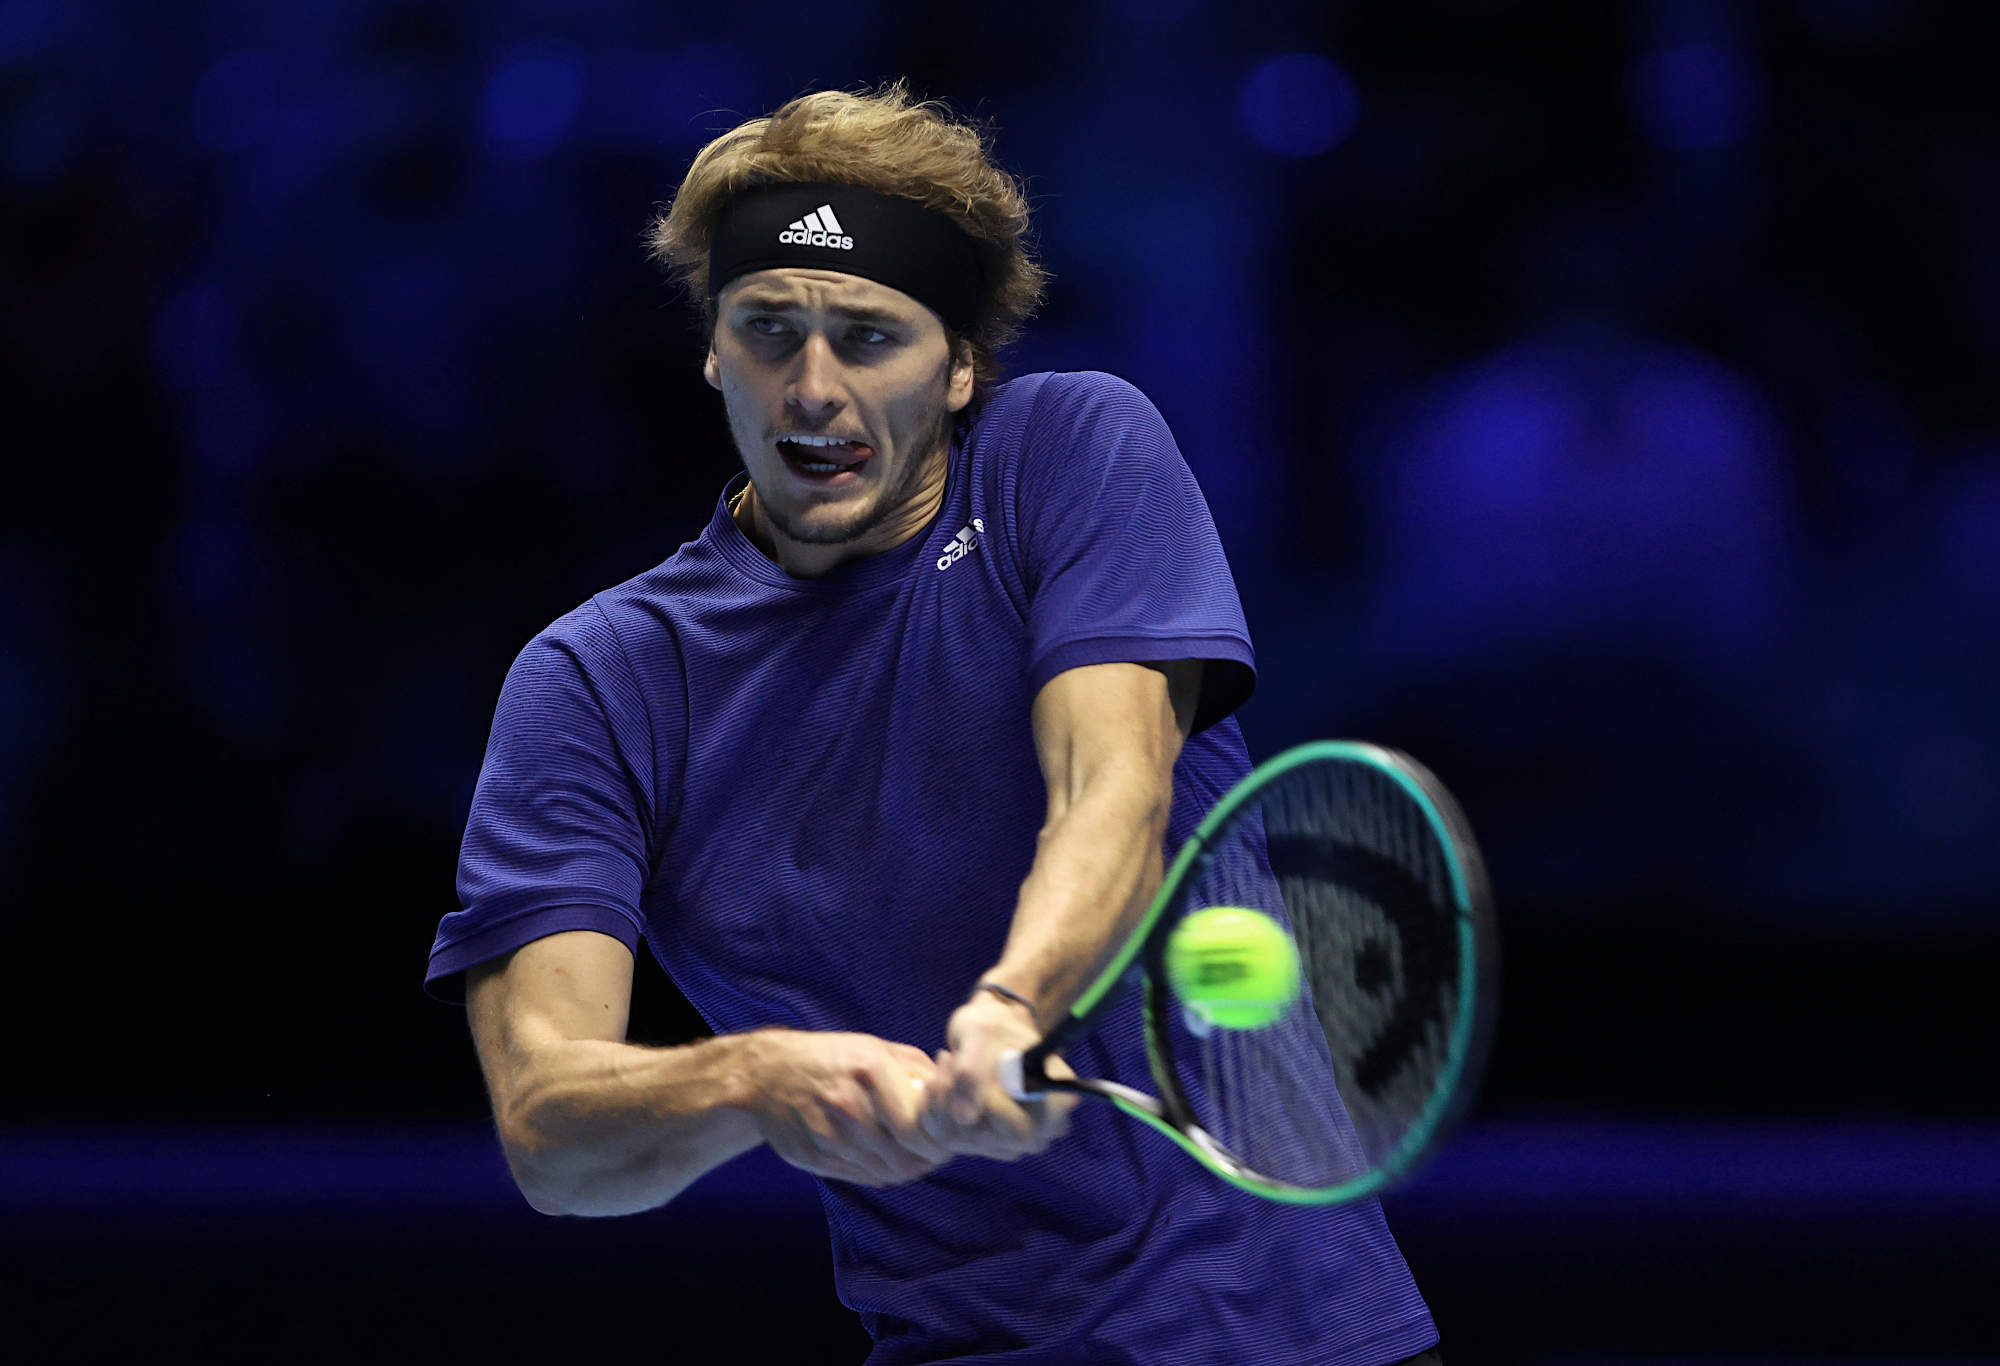 Alex Zverev hits a backhand at the 2021 ATP Finals